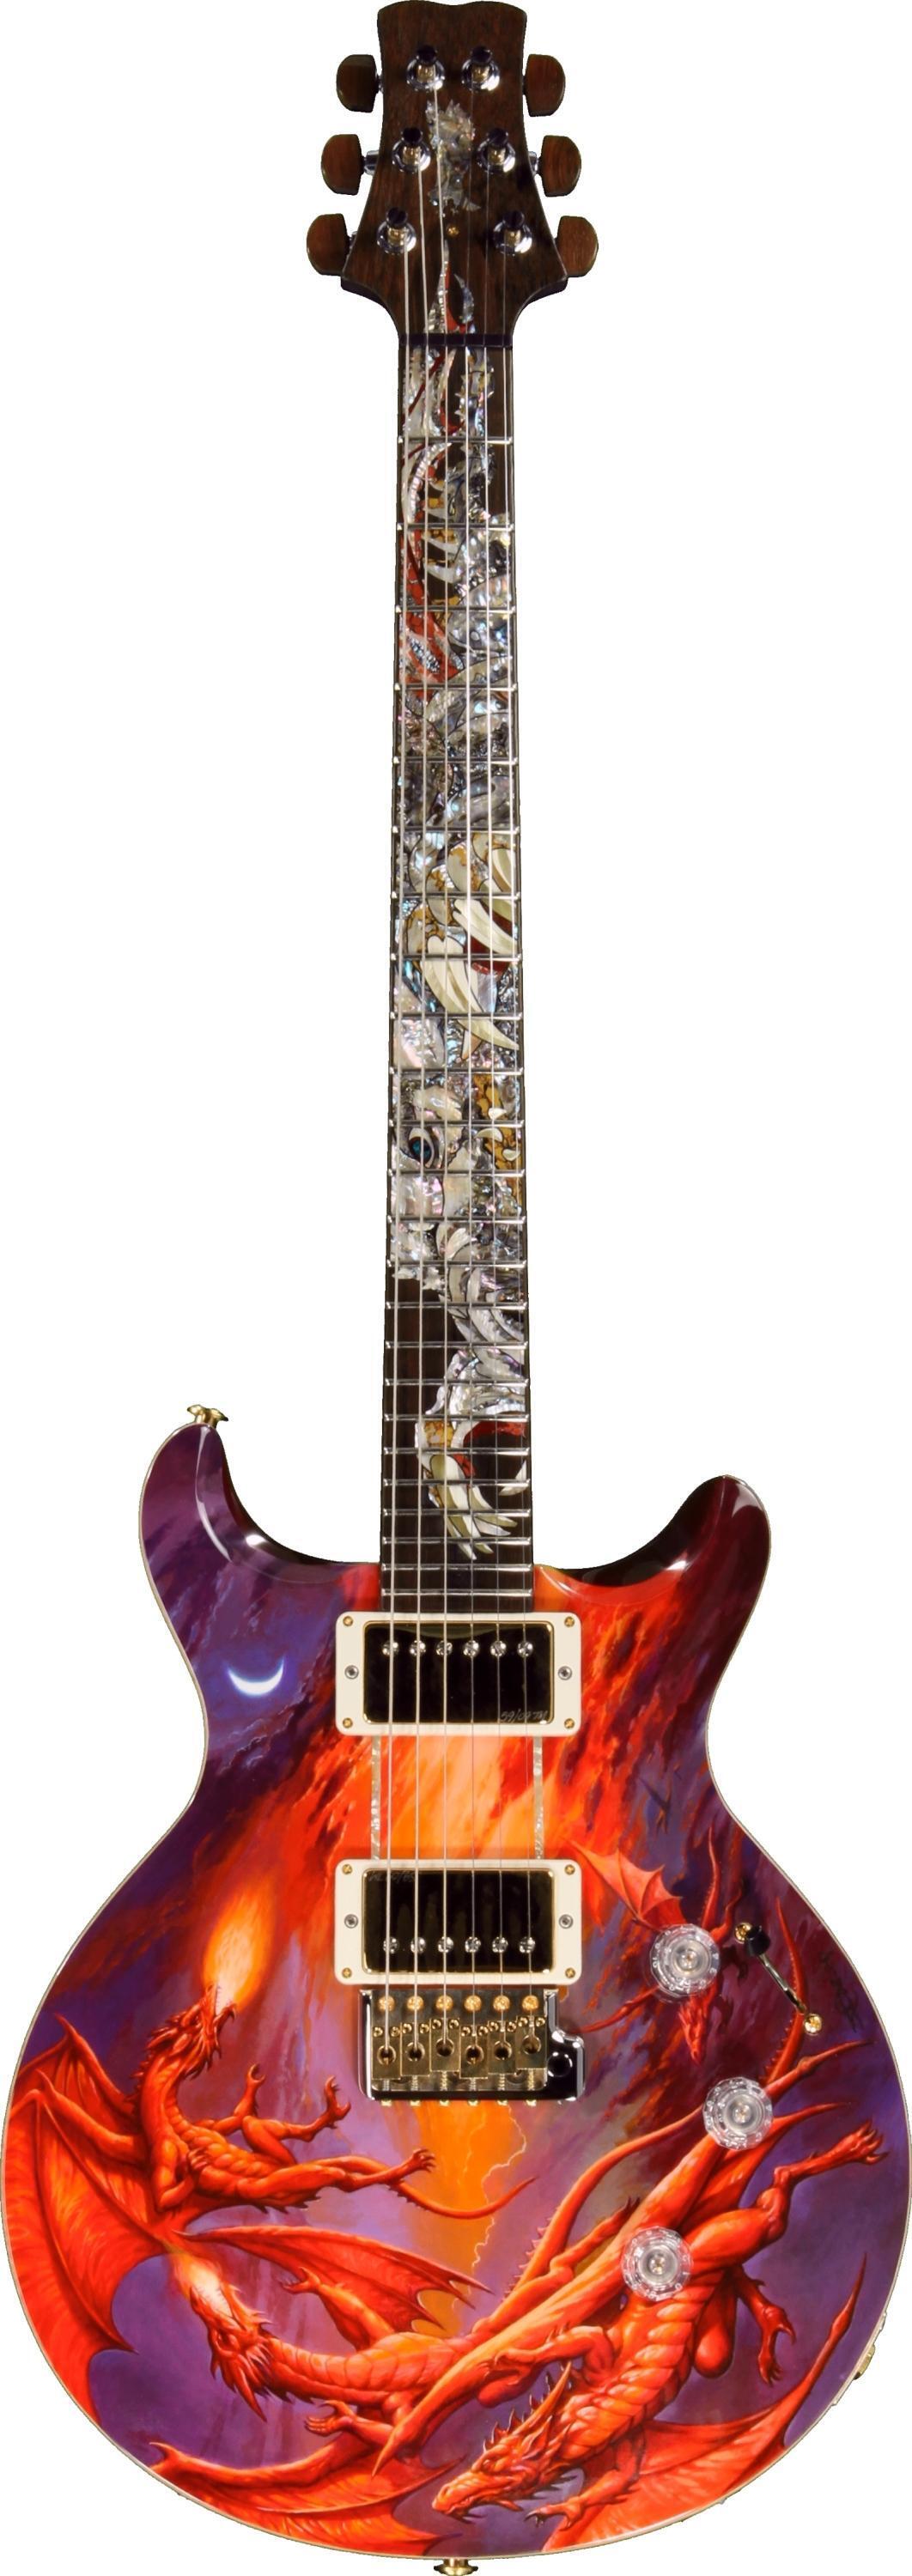 PRS Private Stock Painted Dragon #9 - Painted Dragon #9